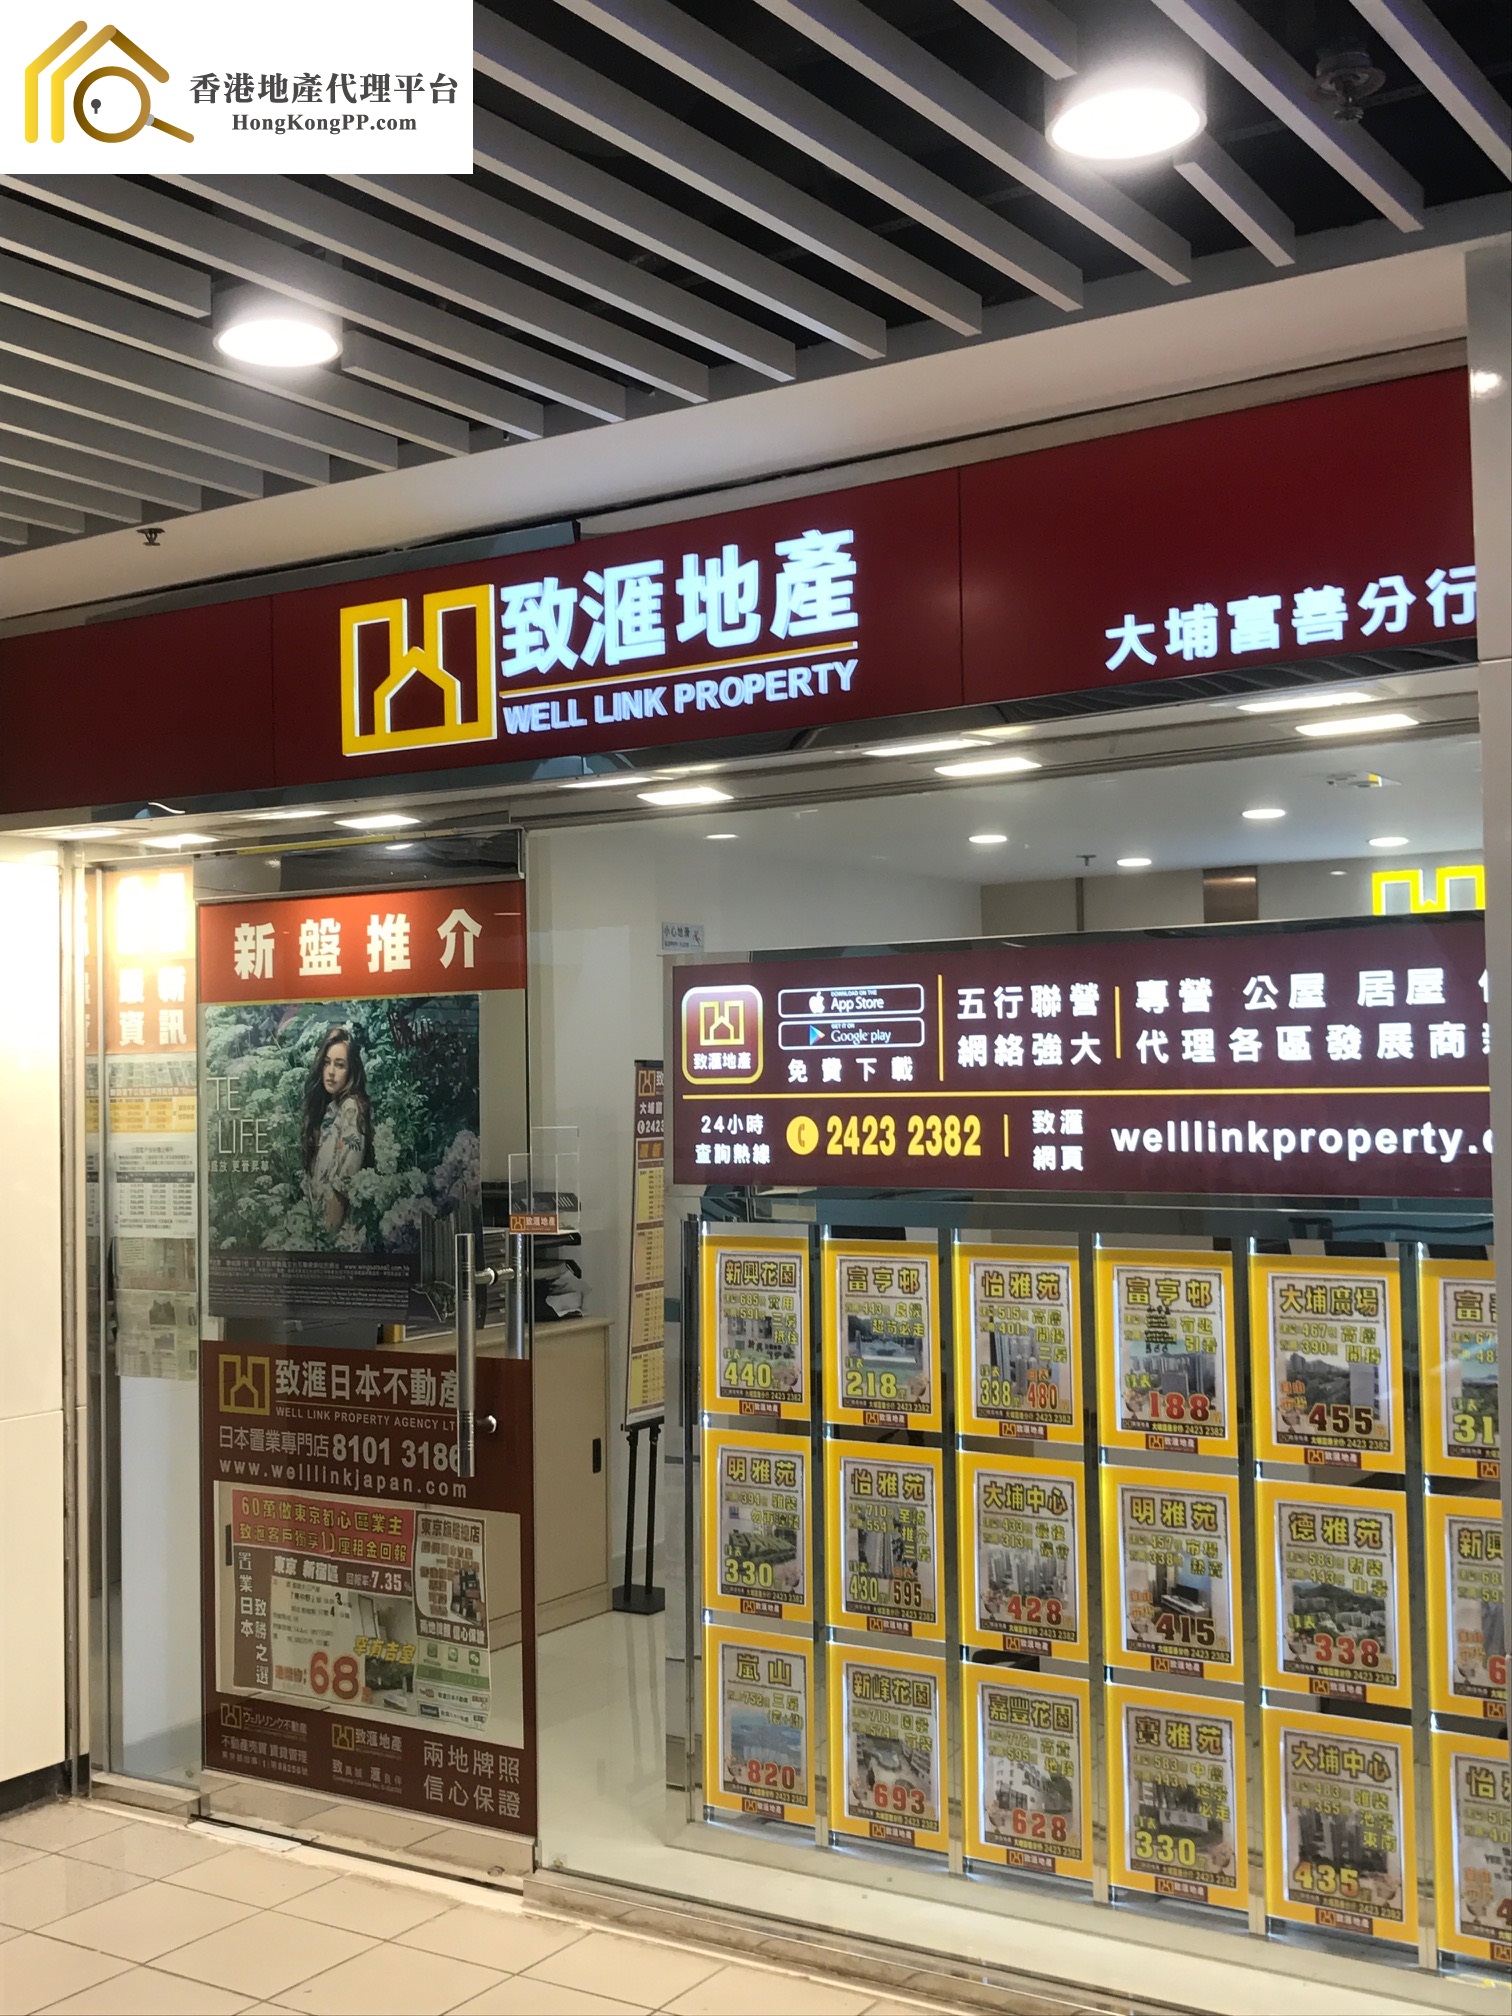 Village HouseEstate Agent: 致滙地產 Well Link Property